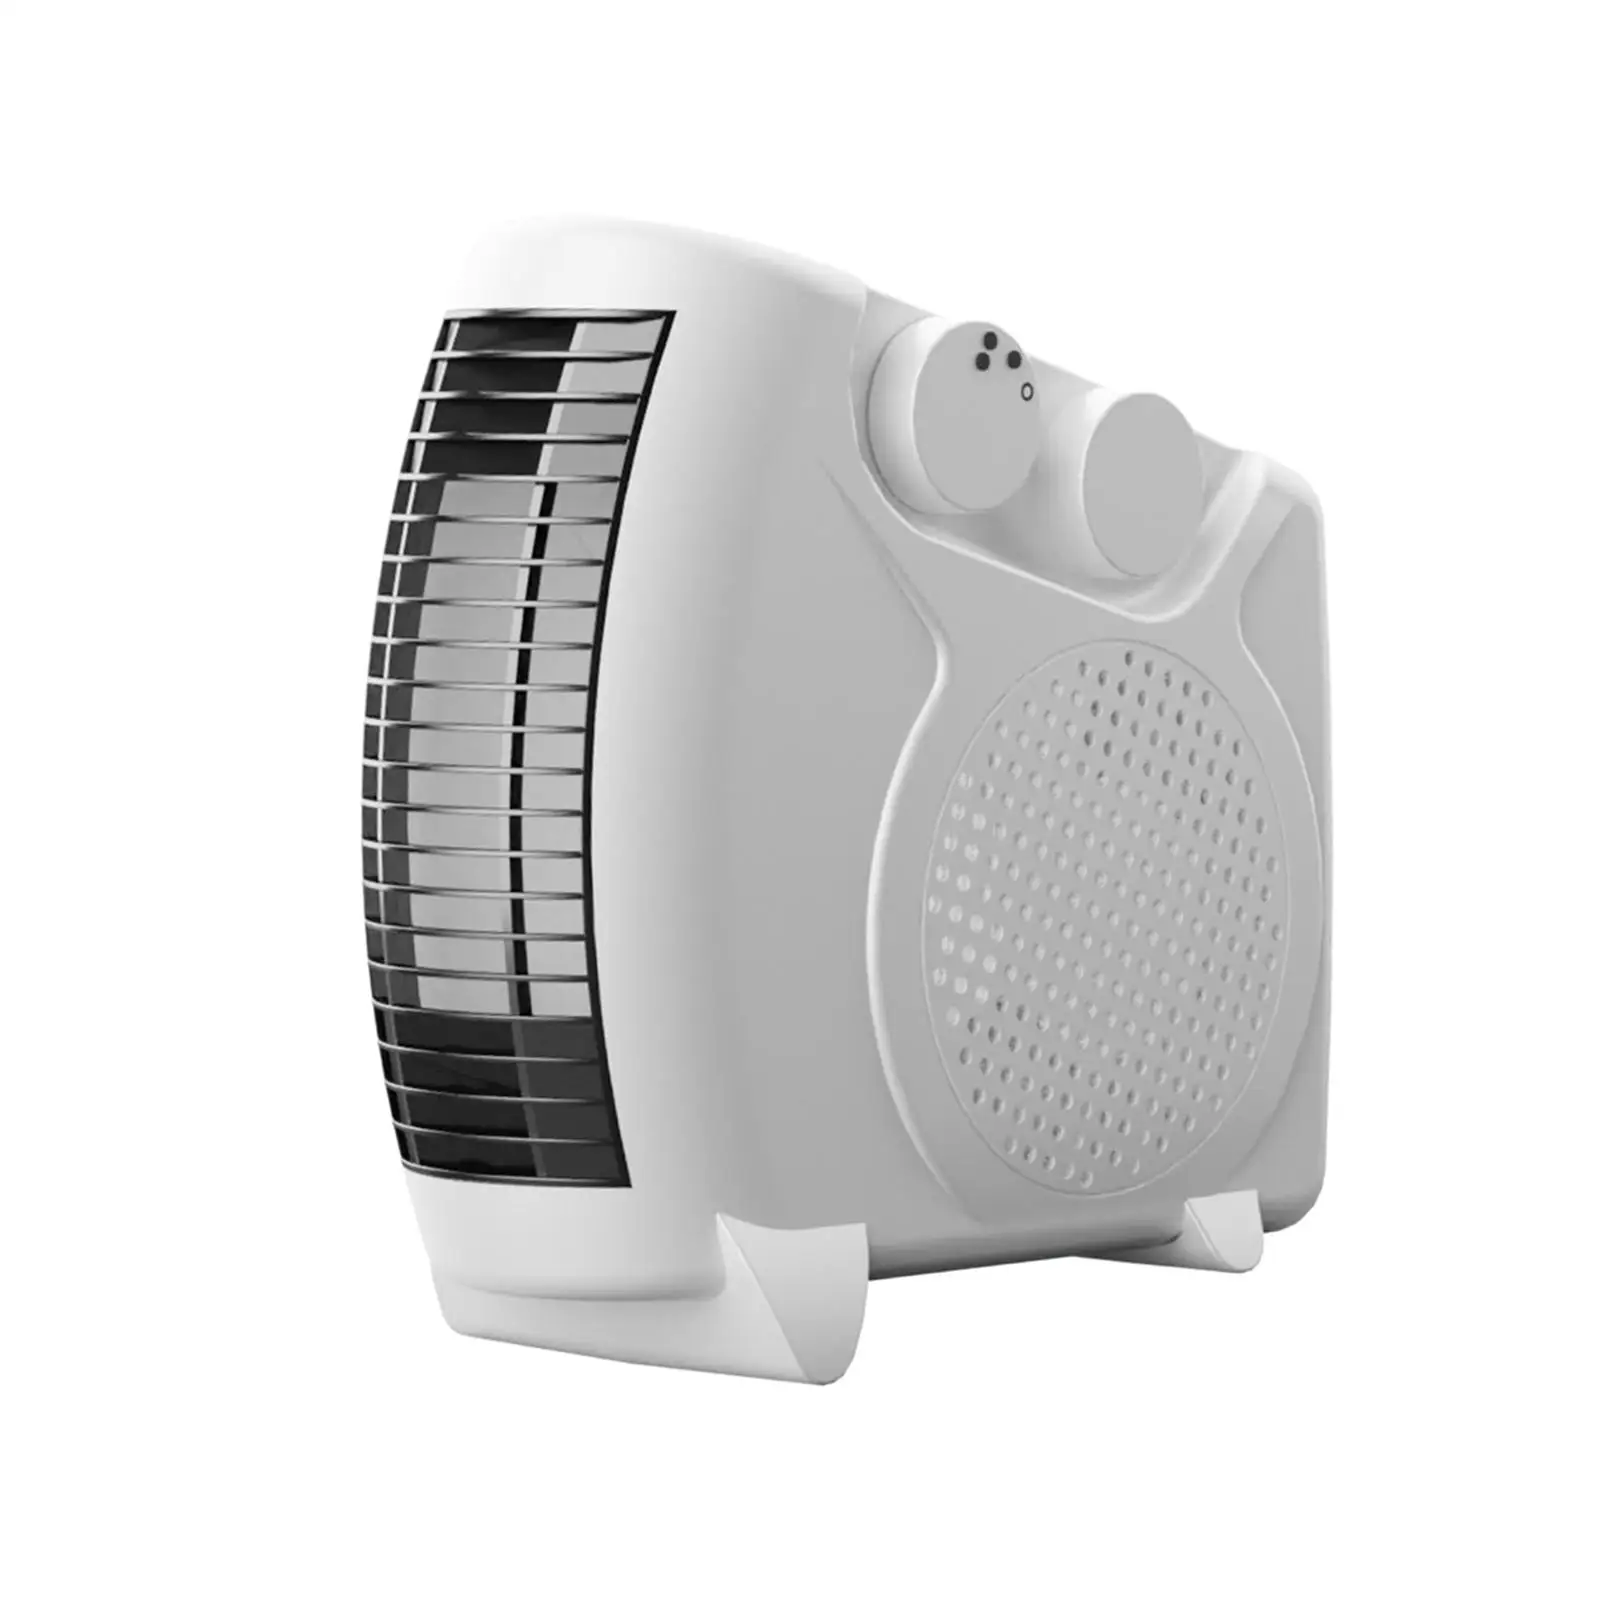 Electric Desktop Space Heater 1200W Compact Size Auto Off Protection Office Heater Household Fan Heater for Bedroom Multipurpose